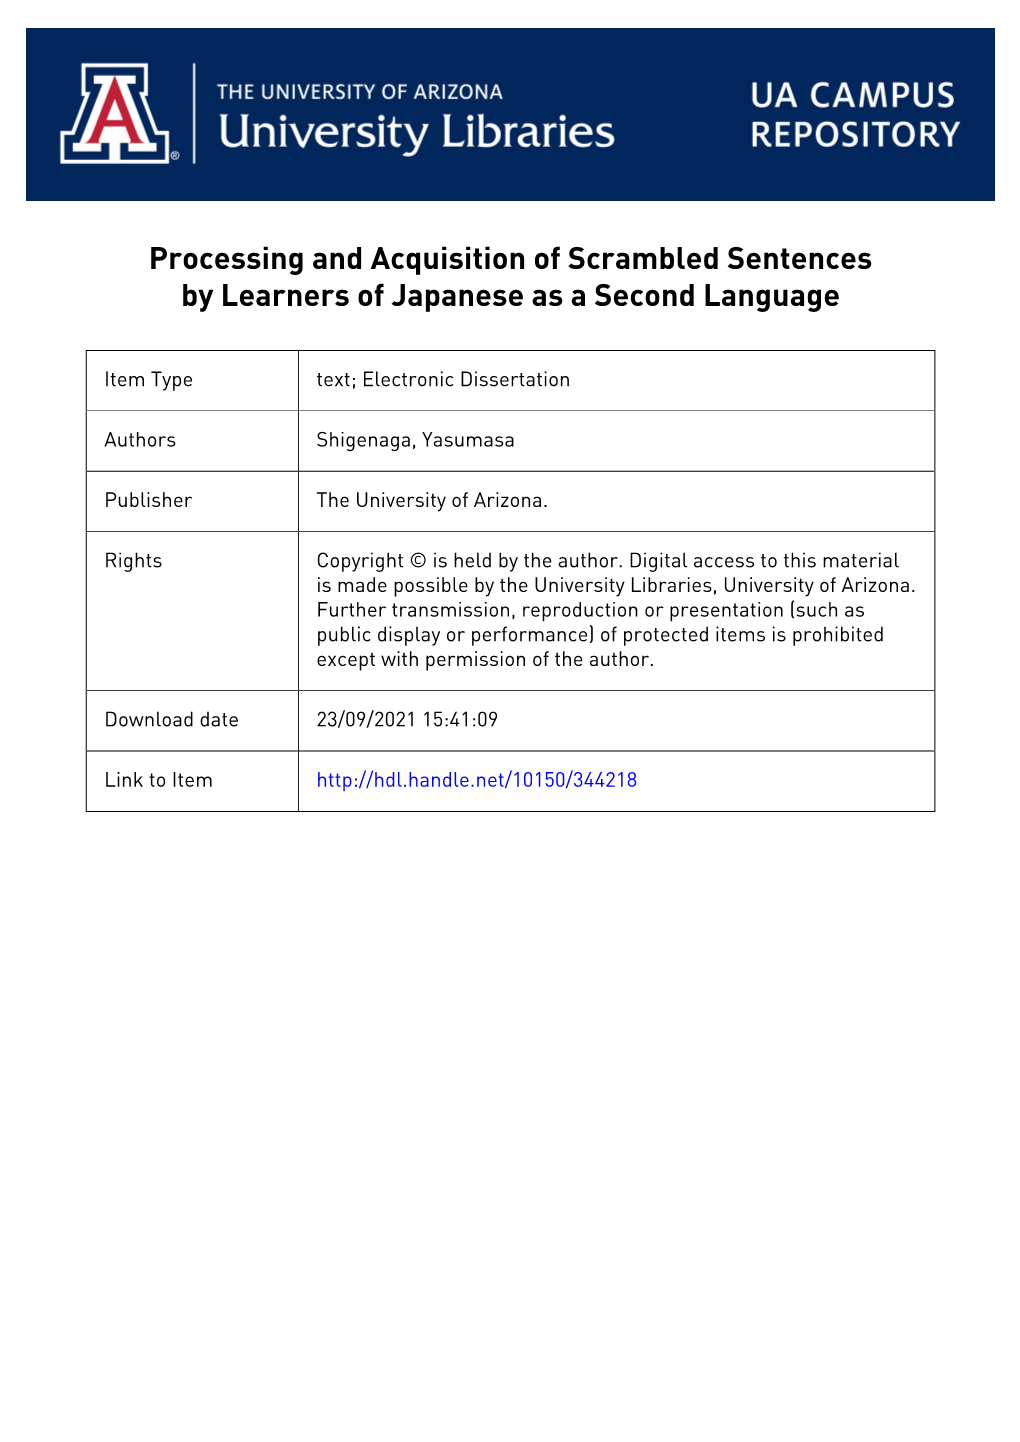 Processing and Acquisition of Scrambled Sentences by Learners of Japanese As a Second Language